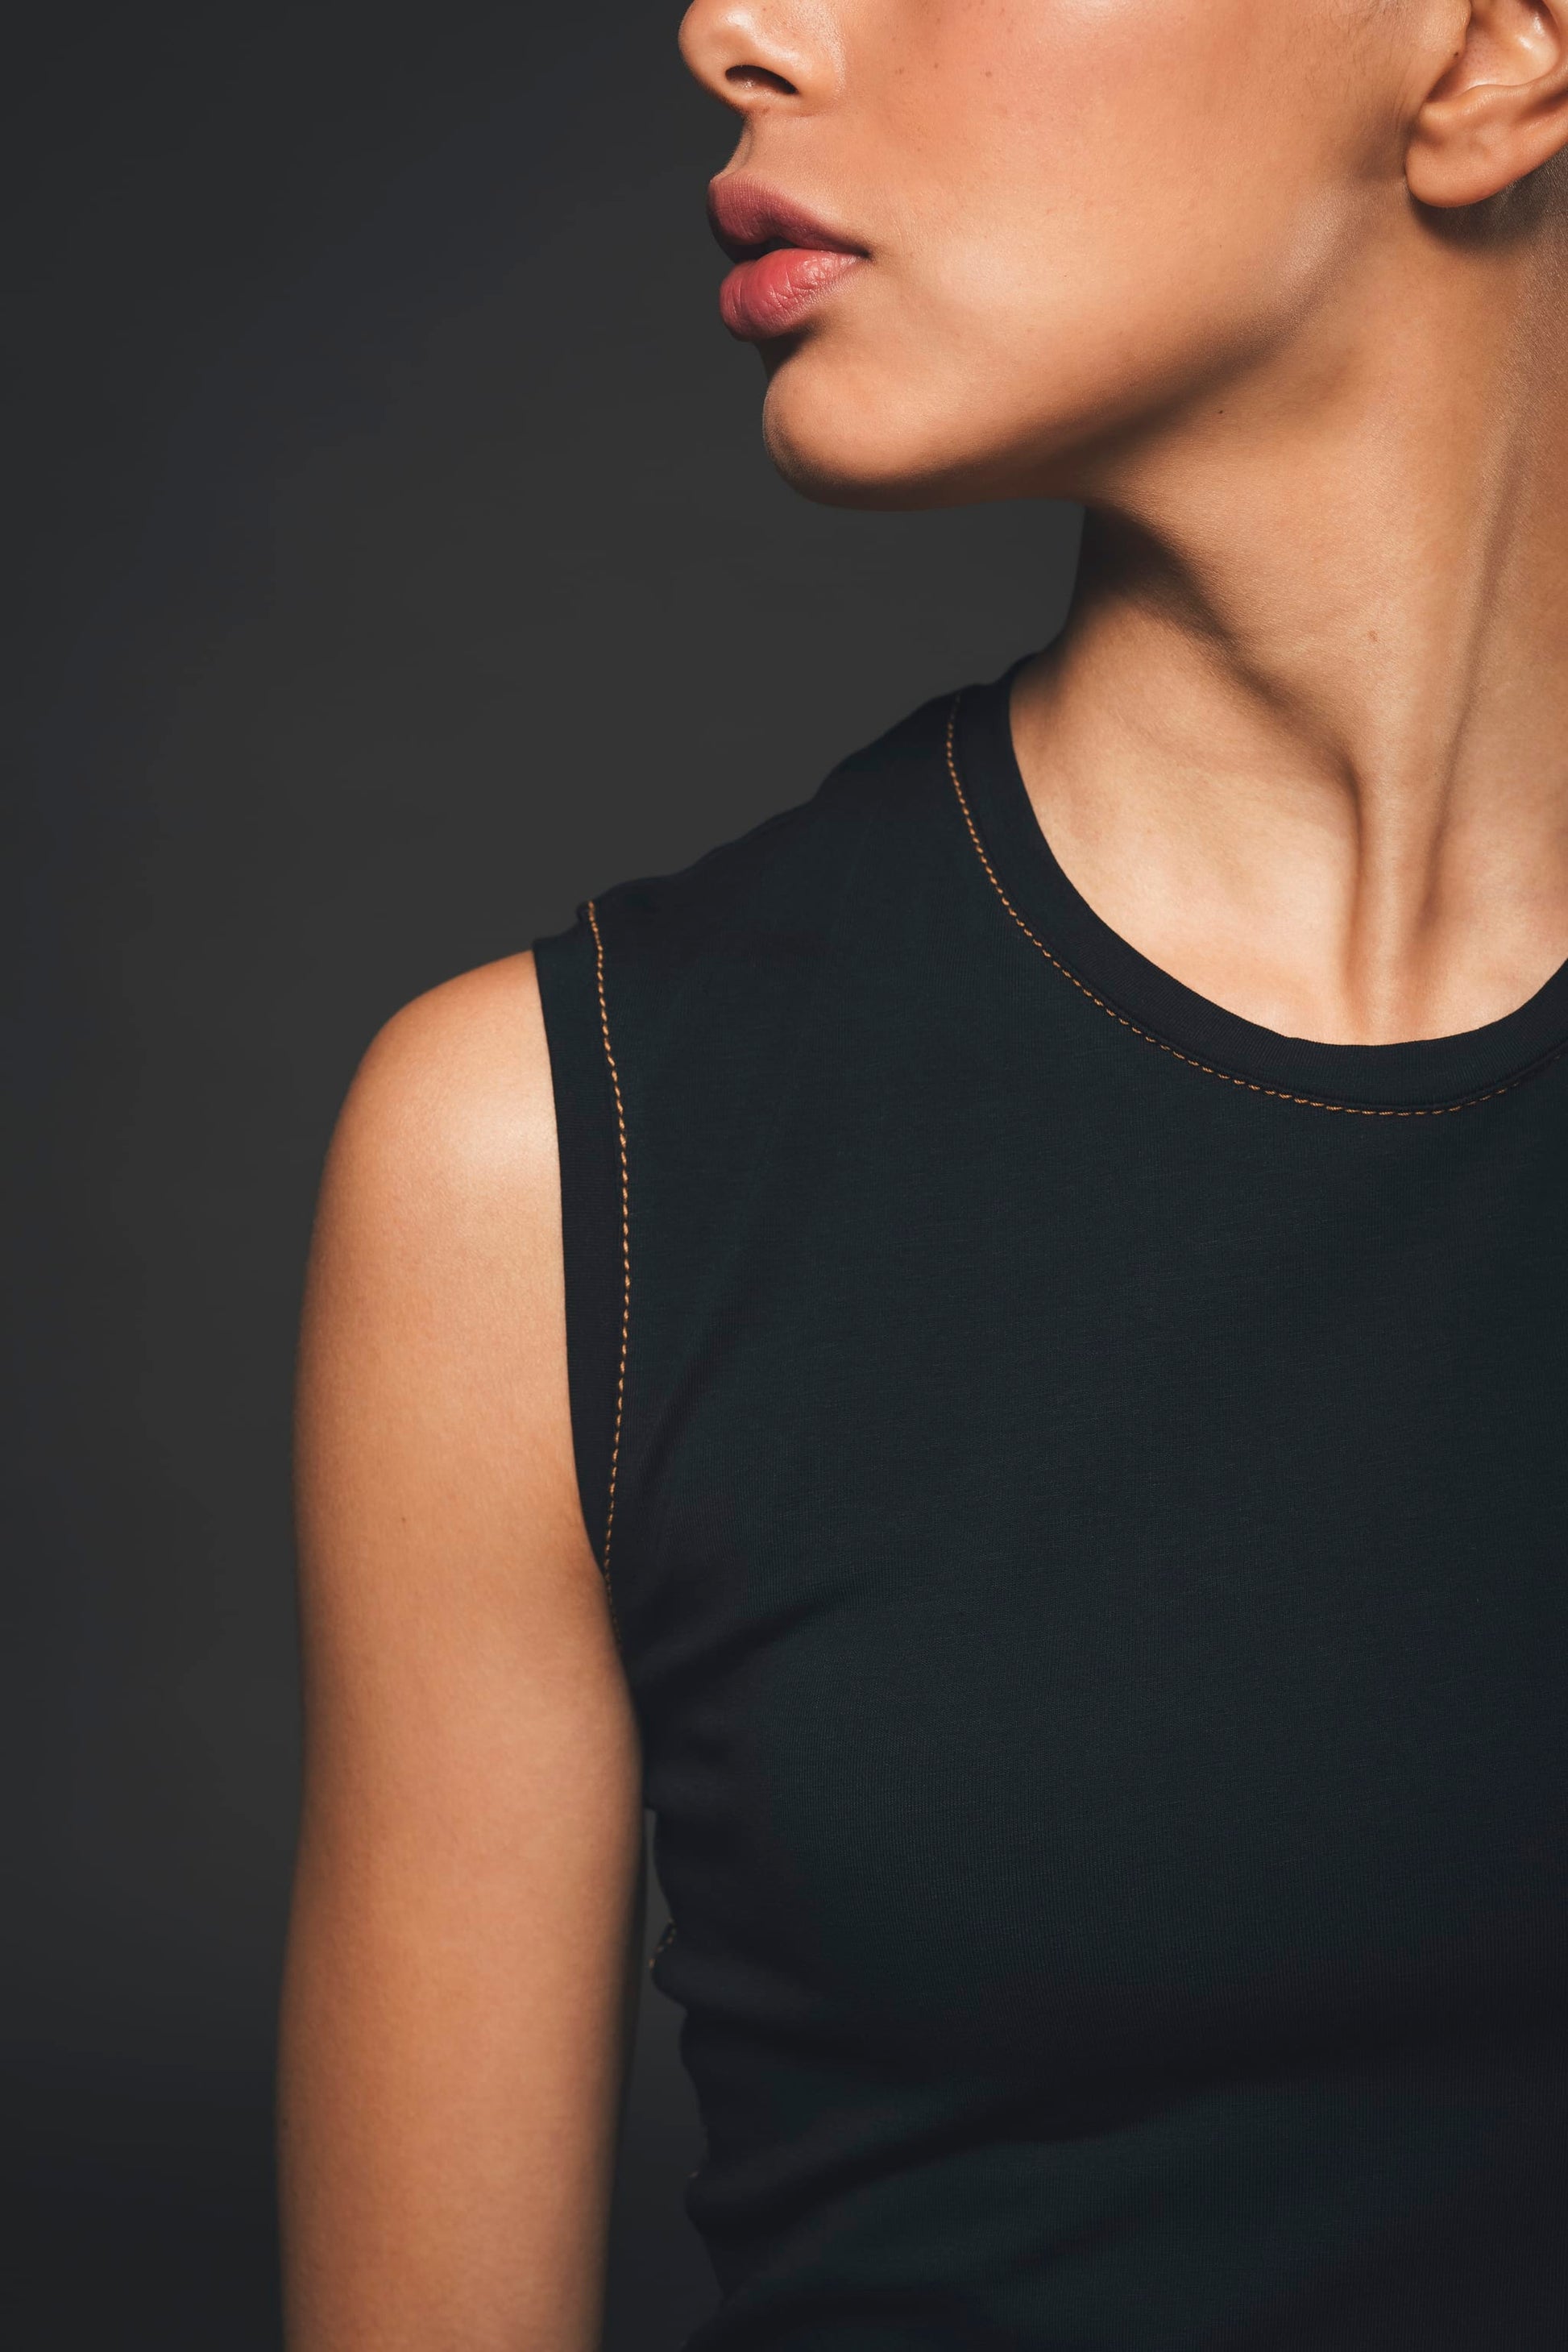 Image of neckline of black sleeveless jumpsuit made by Organique, a sustainable clothing brand.